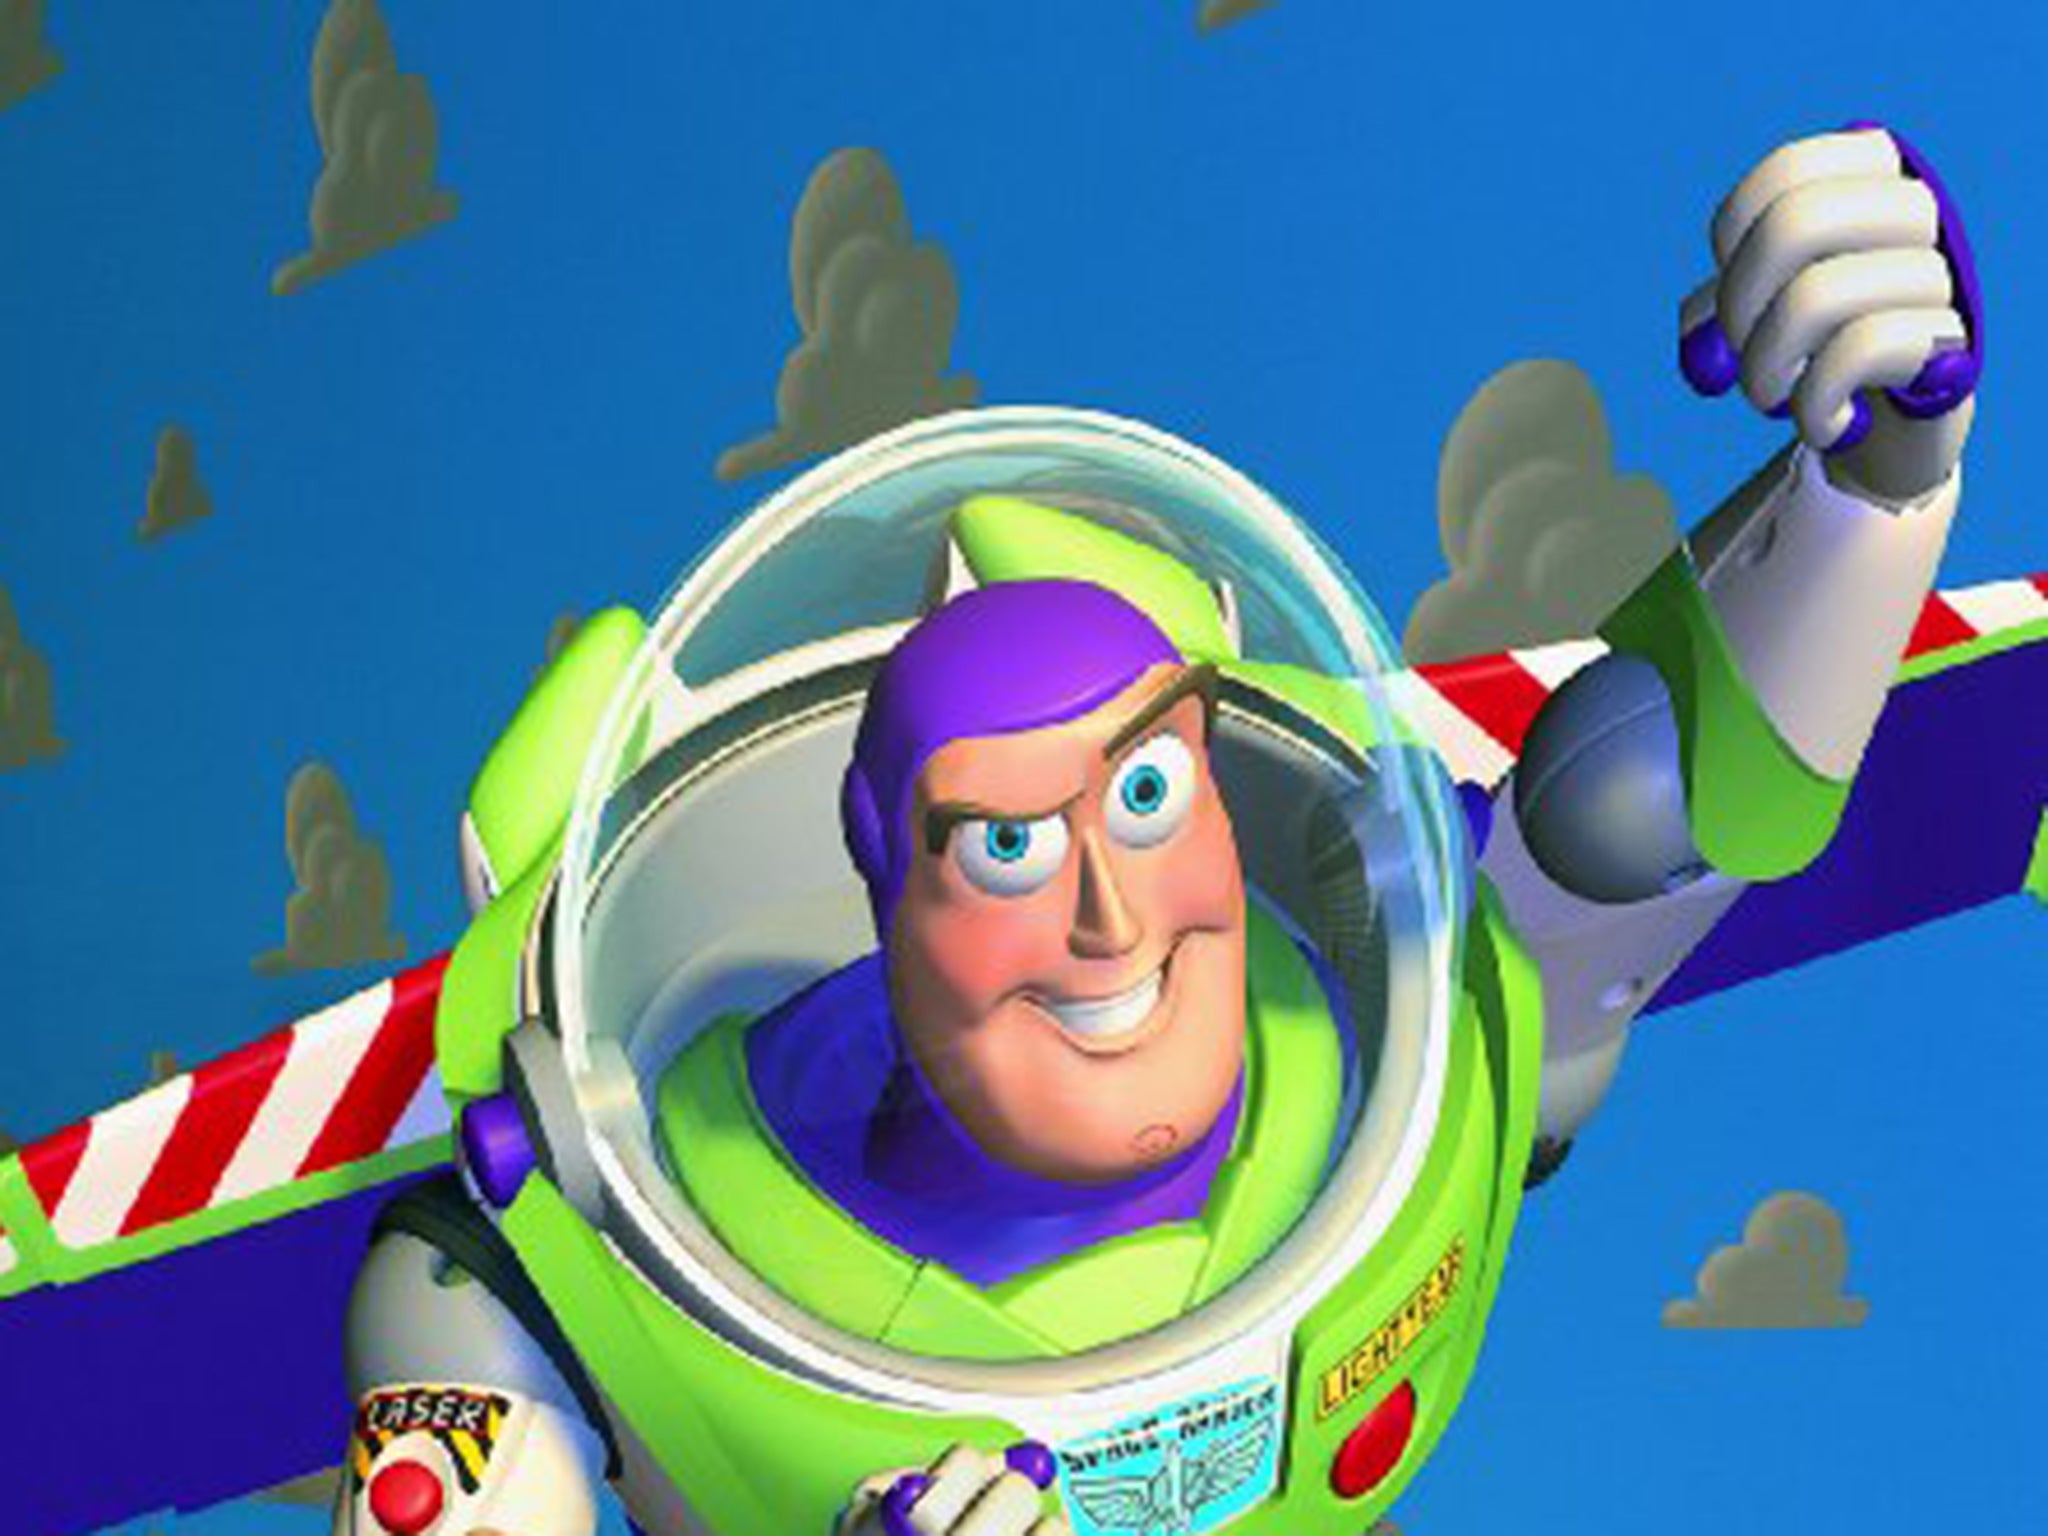 'To infinity...and beyond' is the UK's favourite movie quote, according to a Radio Times poll